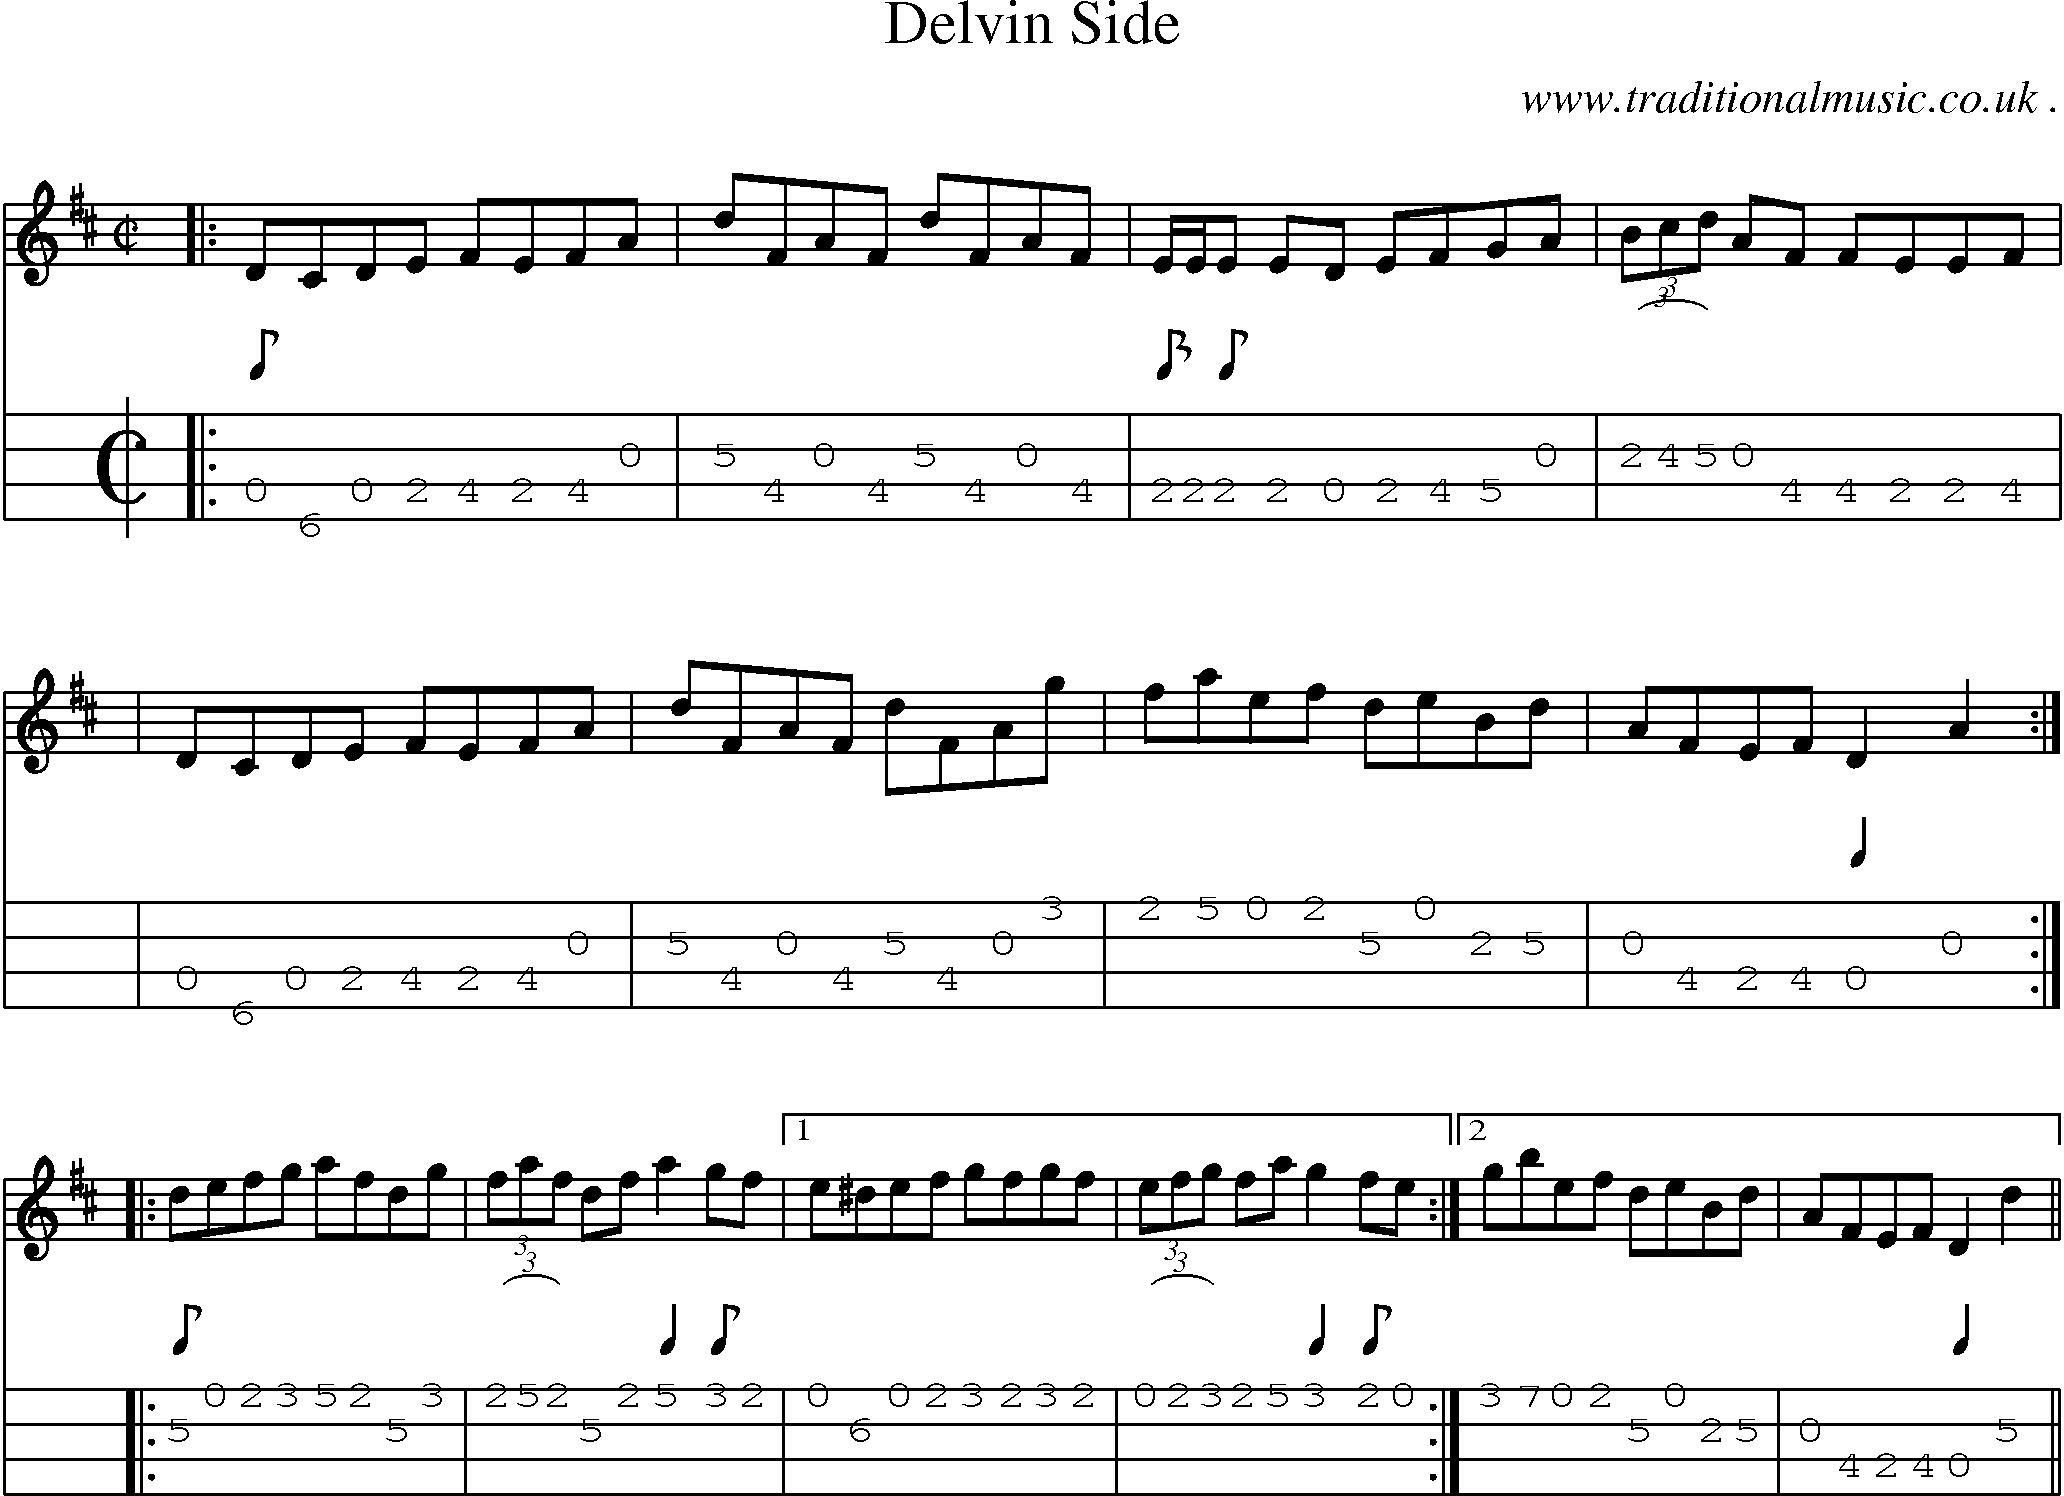 Sheet-music  score, Chords and Mandolin Tabs for Delvin Side